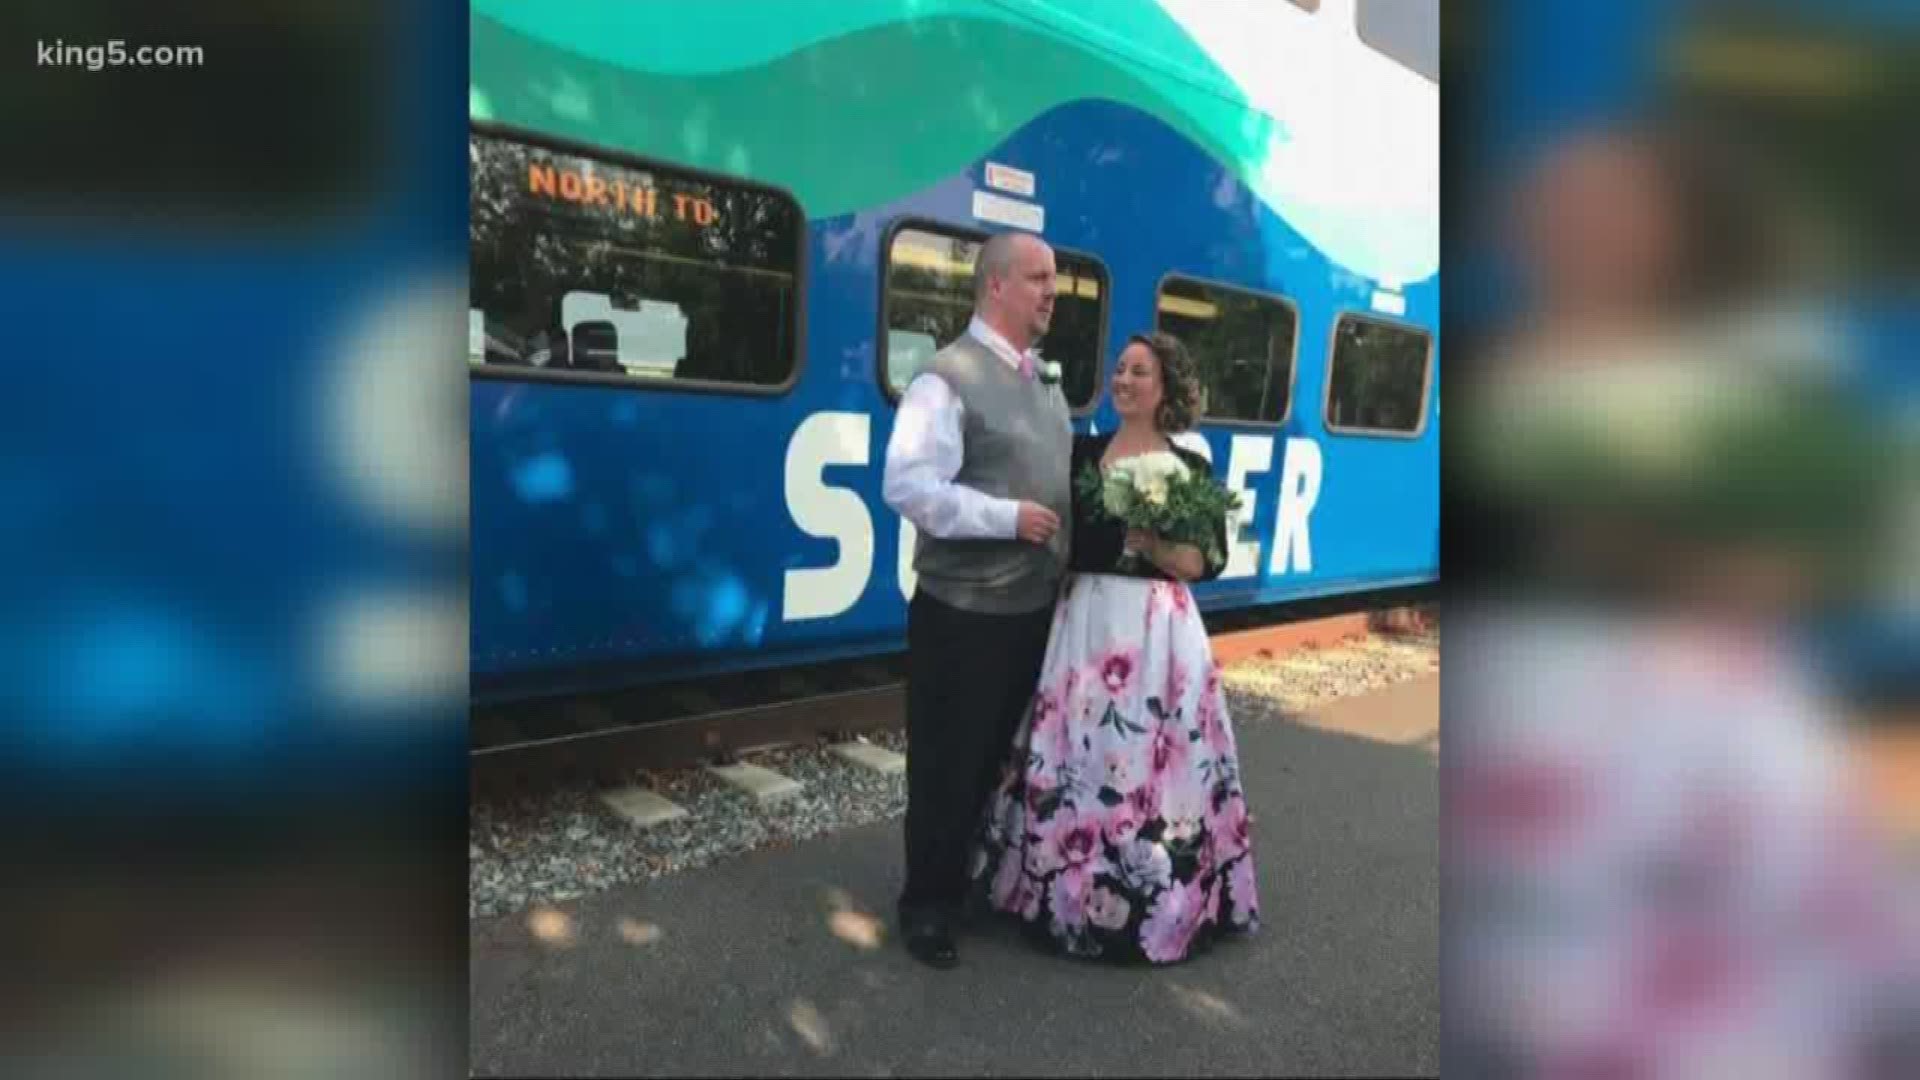 Two strangers were on the fast track to love after their fellow train passengers played Cupid. KING 5 photojournalist Dustin Gagne shares their story.